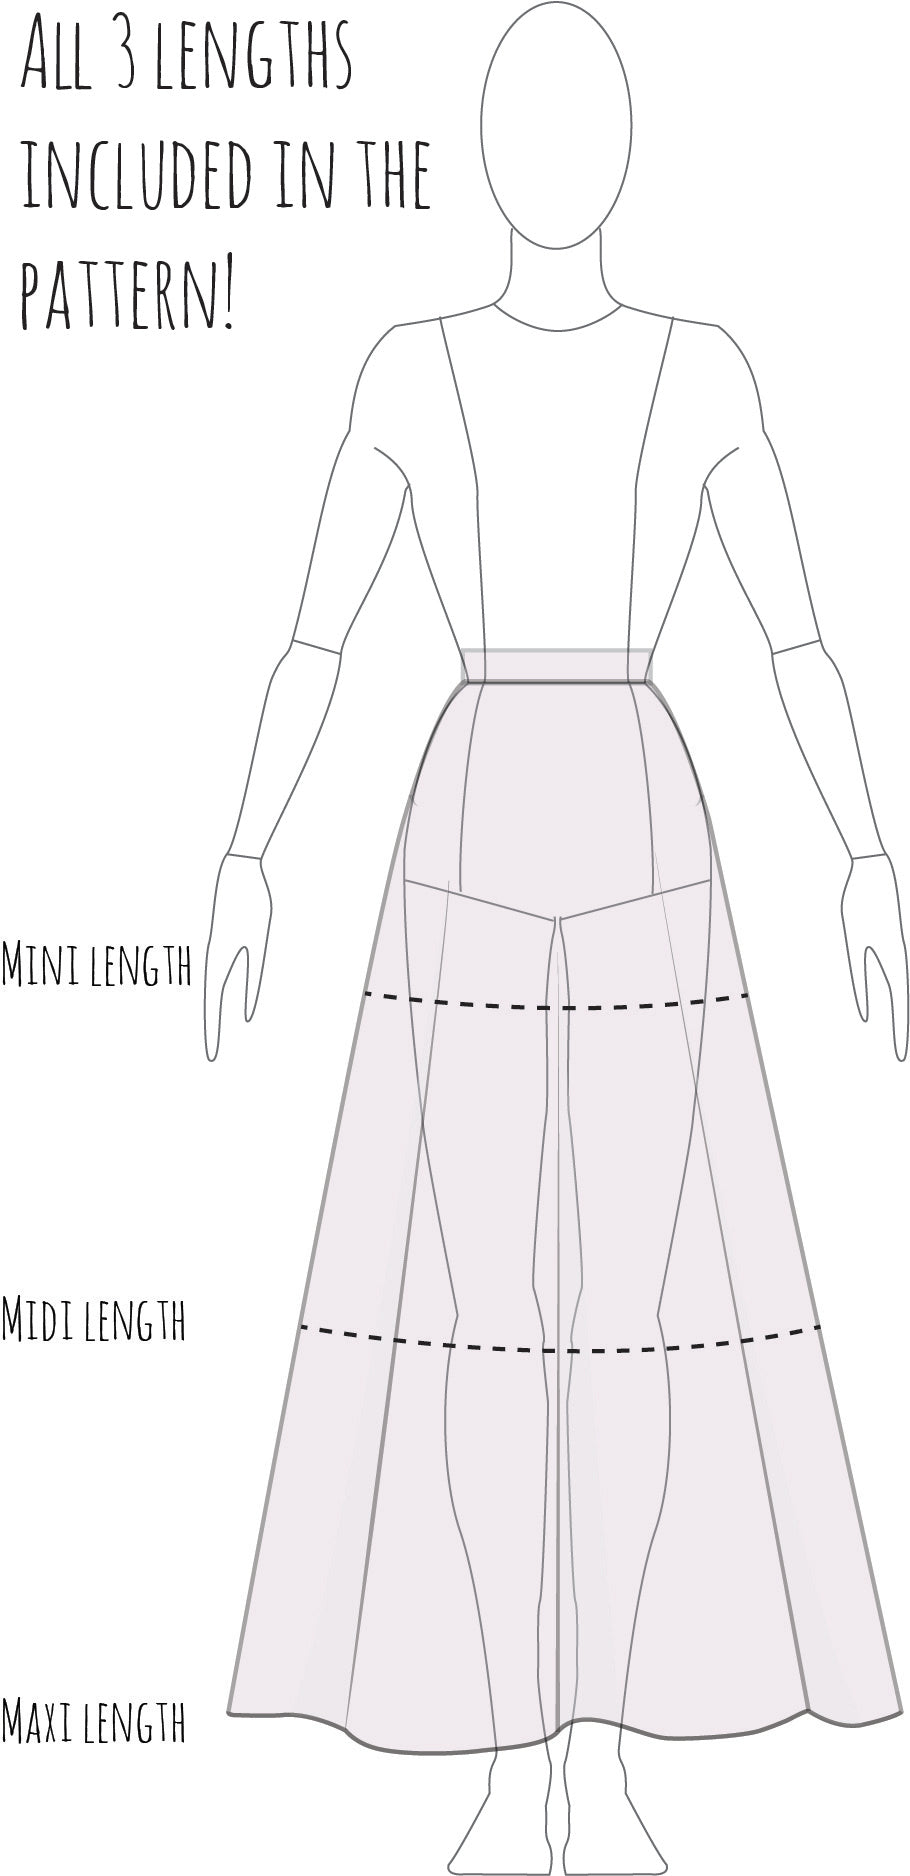 DIY: How To Draw A Circle Skirt Pattern? - anicka.design